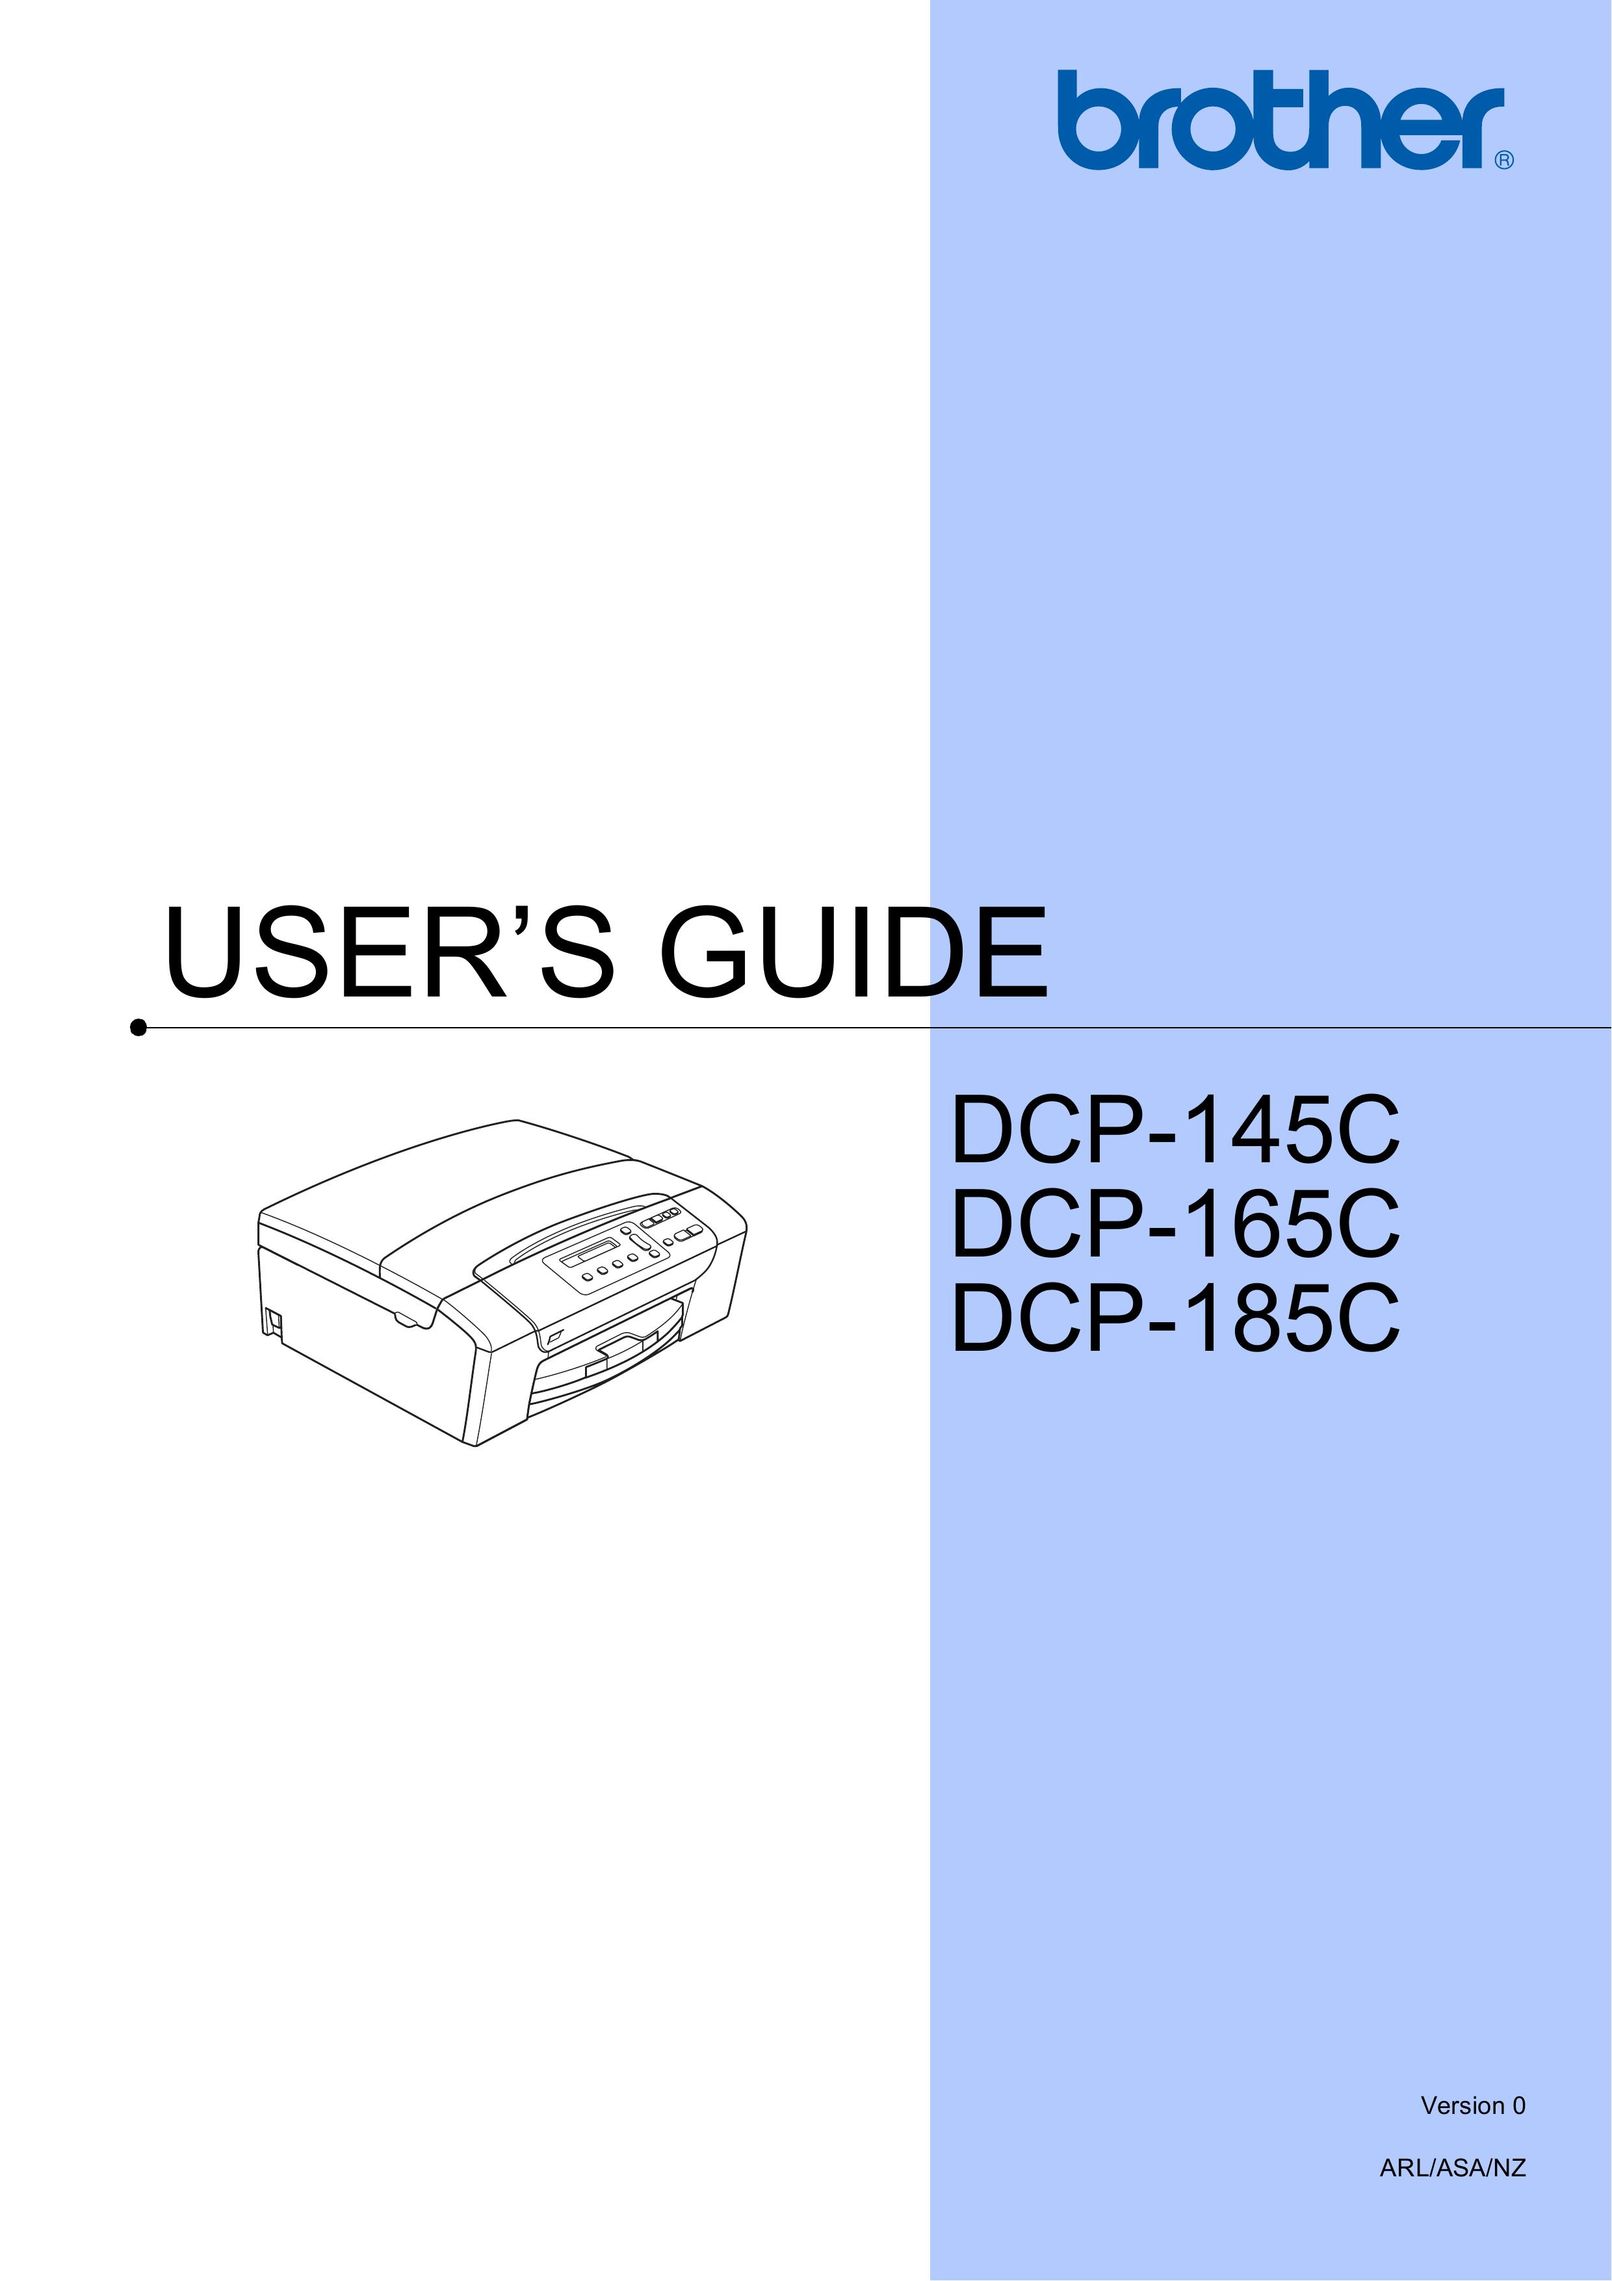 Brother DCP-145C Projector User Manual